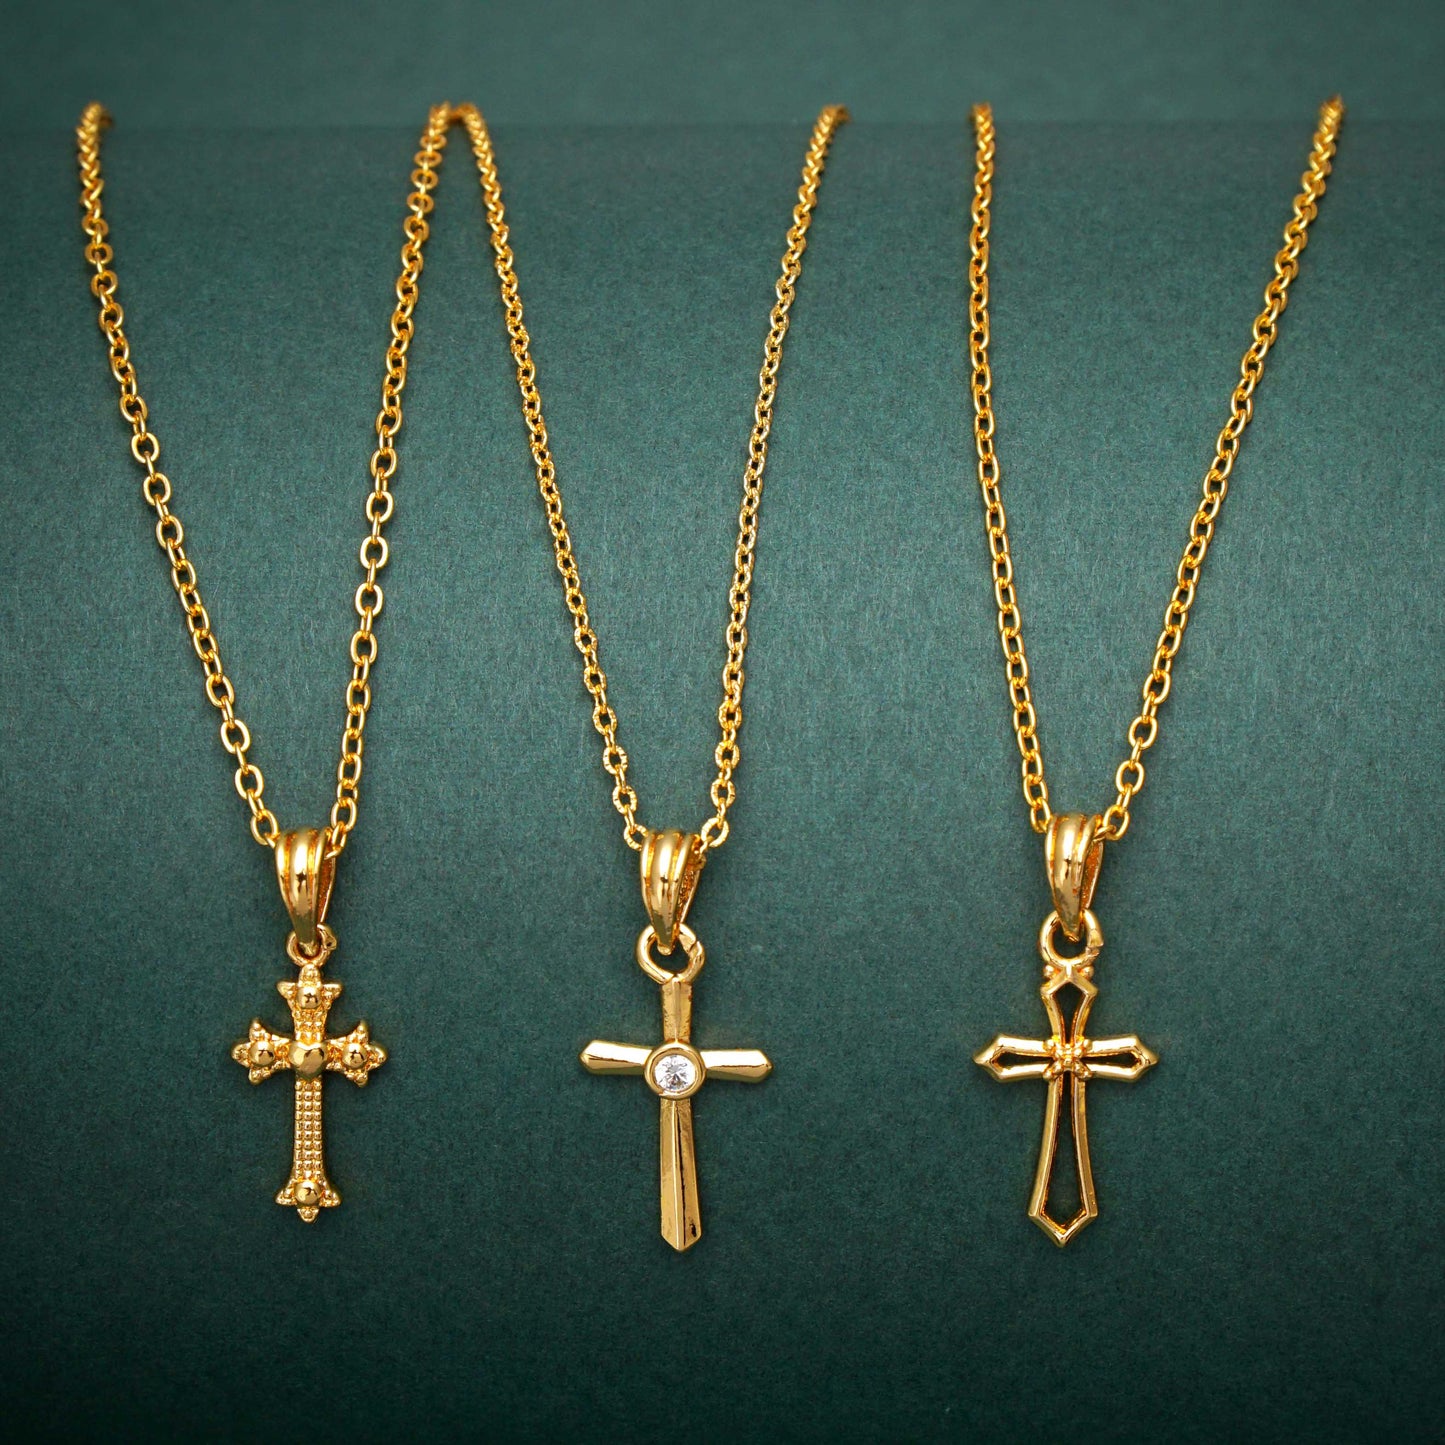 Set of 3 Cross Shape Jesus Gold Plated Necklace Chains for Girls and Men